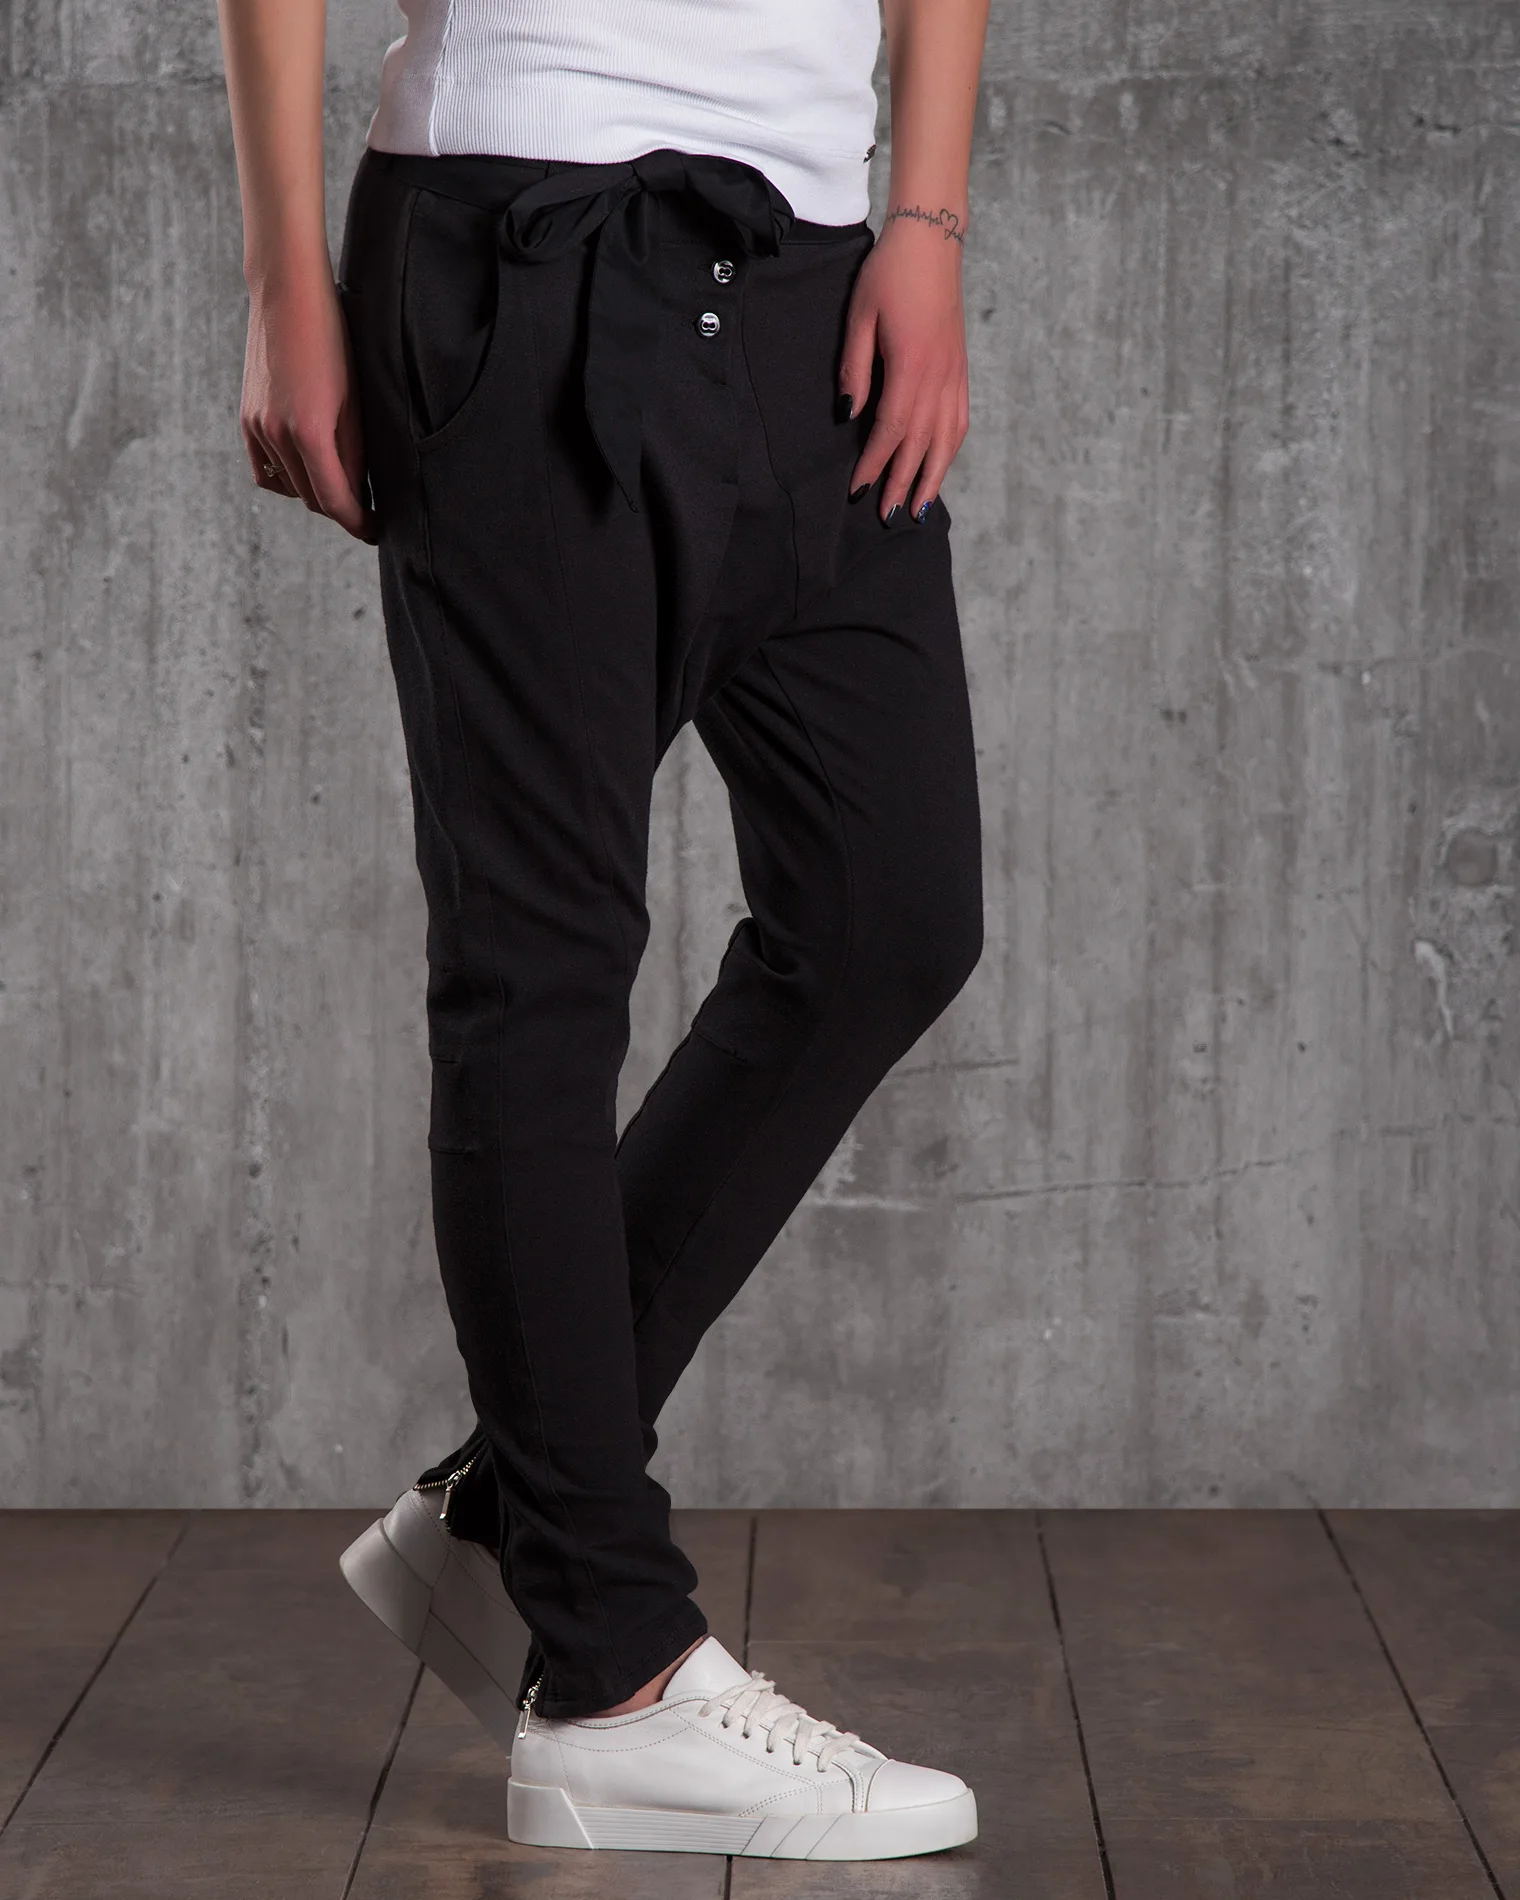 Trade Belted Trousers, Black Color